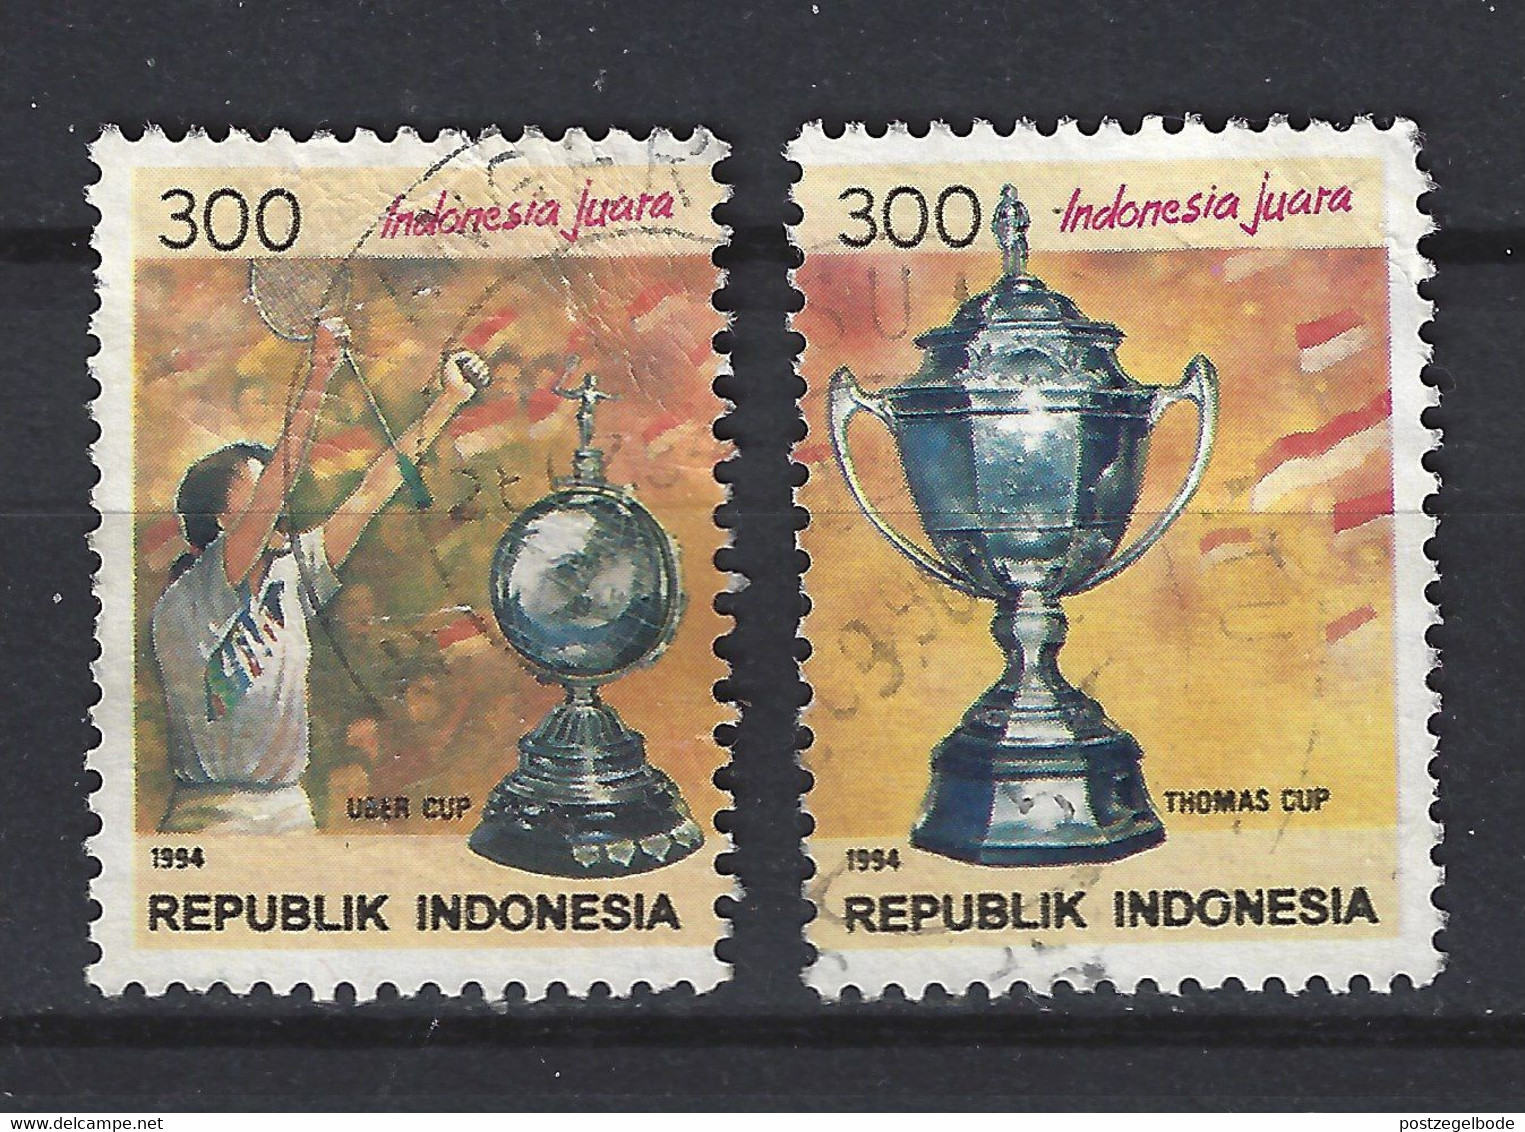 Indonesia Indonesie 1592-1593 Used ; Badminton 1994 NOW MANY STAMPS INDONESIA VERY CHEAP - Badminton